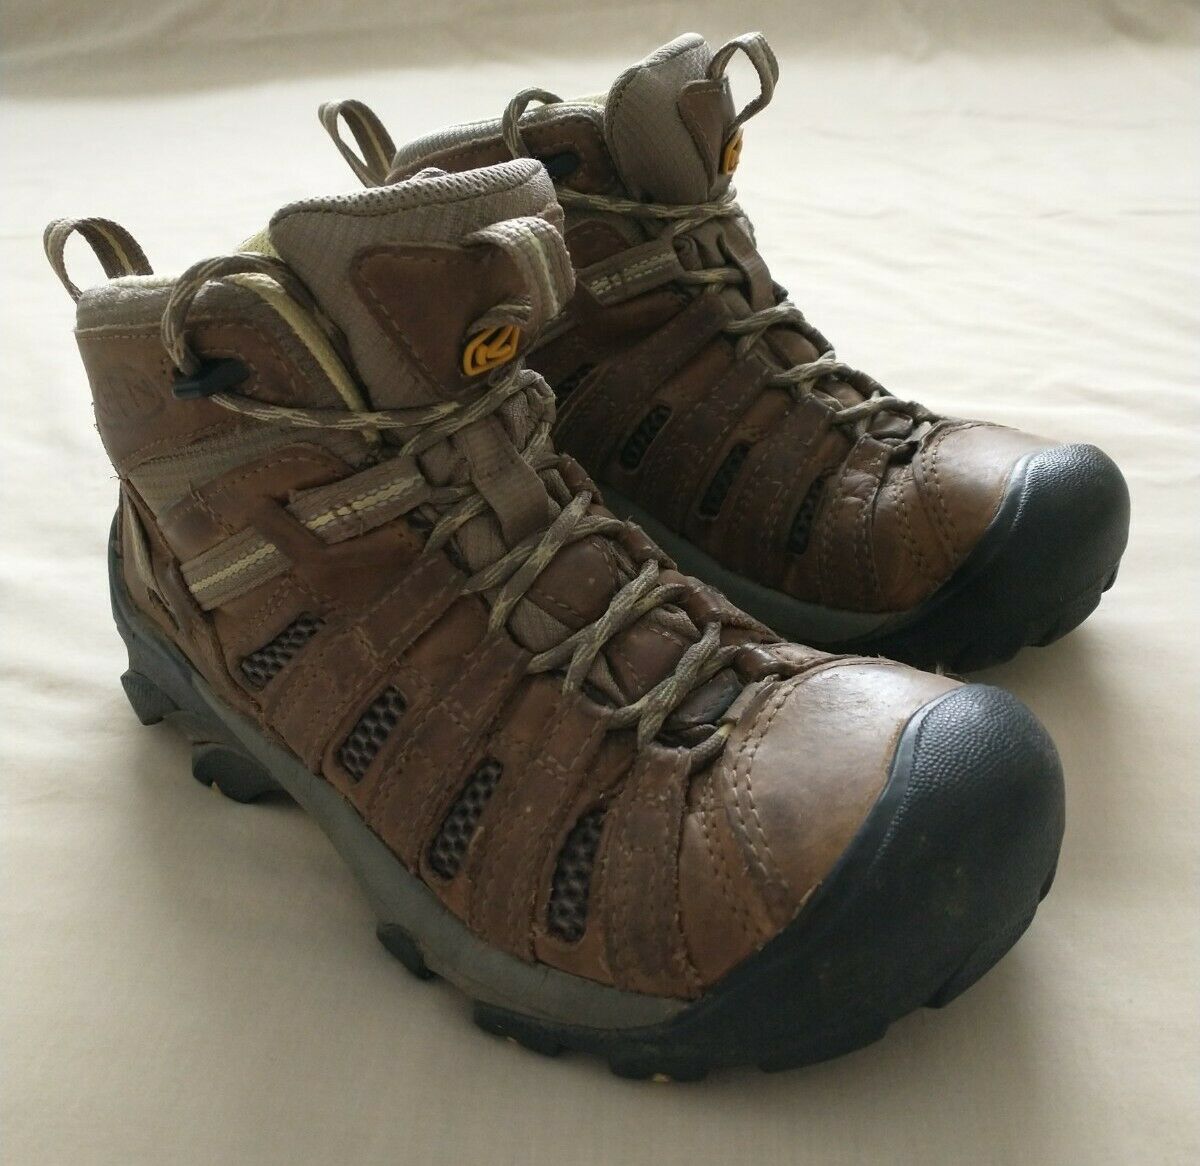 Women's Keen Voyageur Mid Brown Hiking Boot 1010138 Size US 7.5